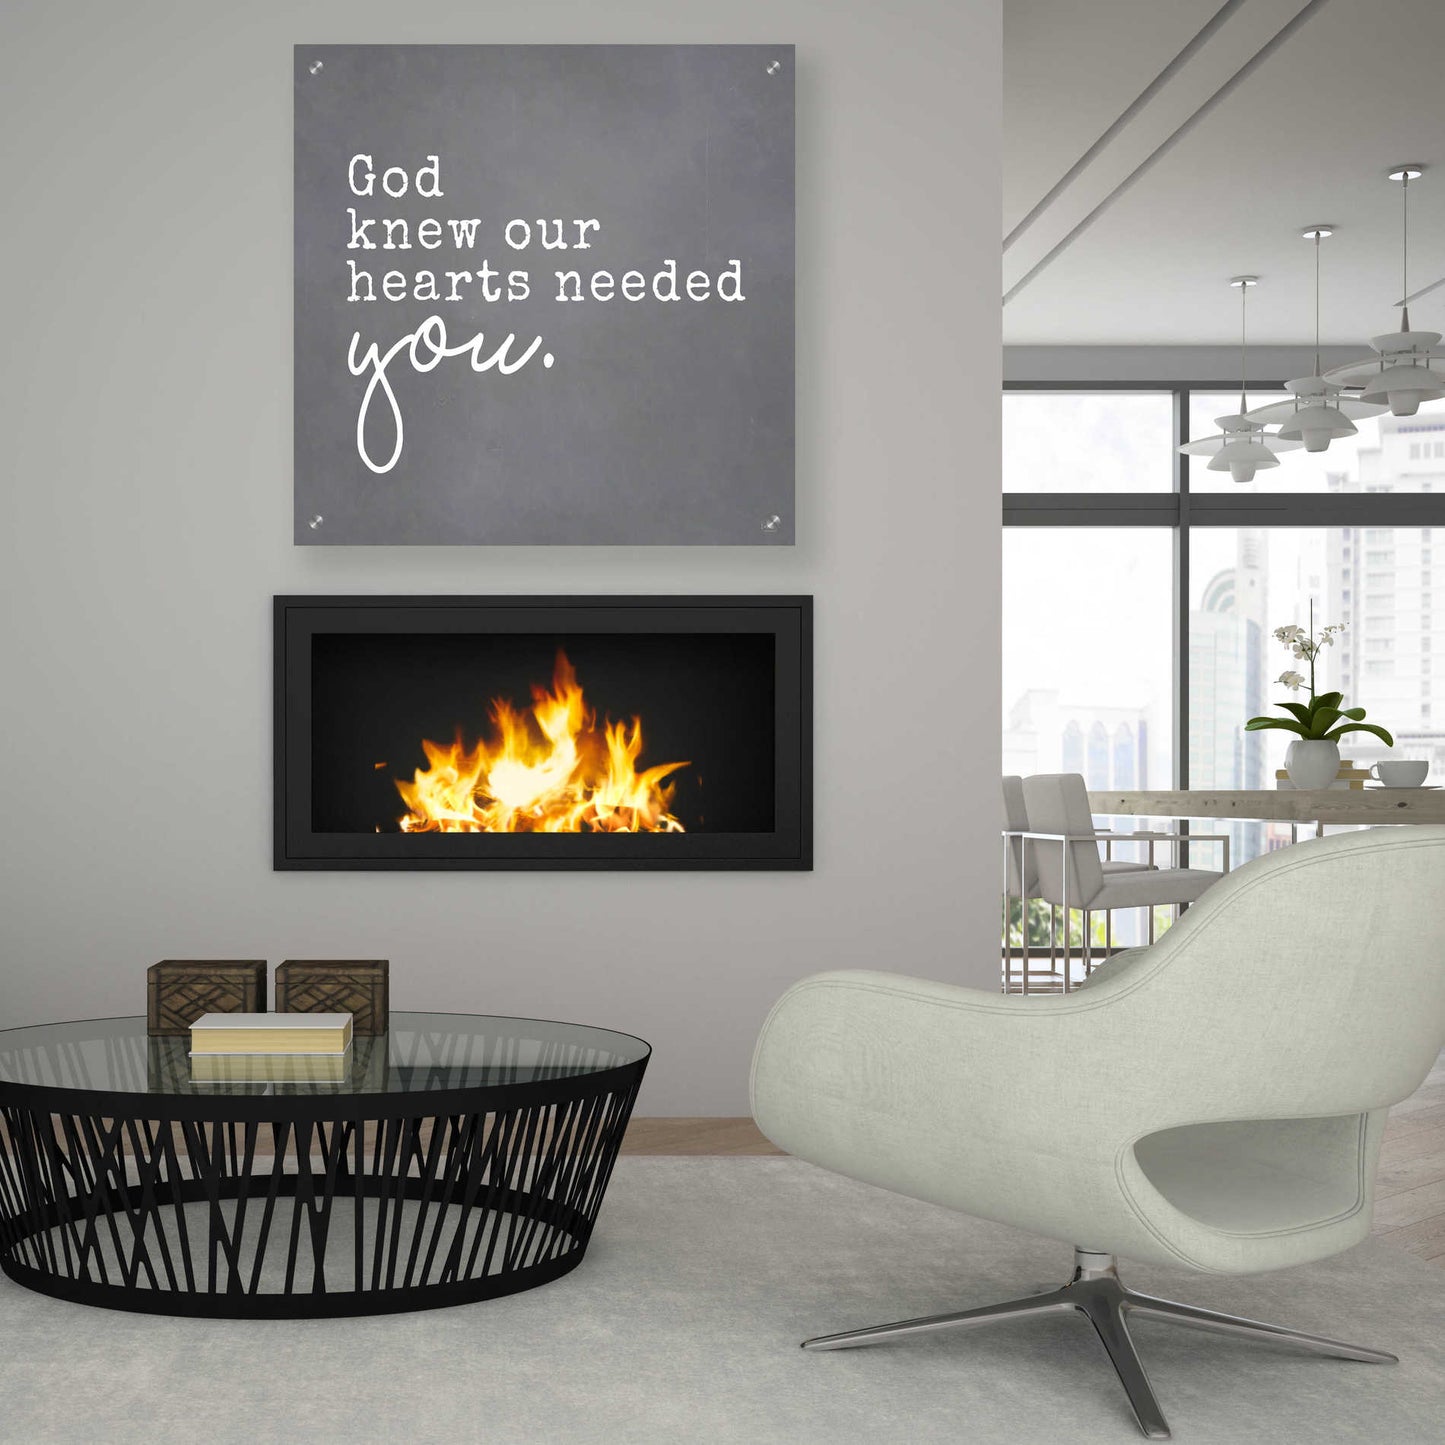 Epic Art 'God Knew Our Hearts Needed You' by Lux + Me, Acrylic Glass Wall Art,36x36